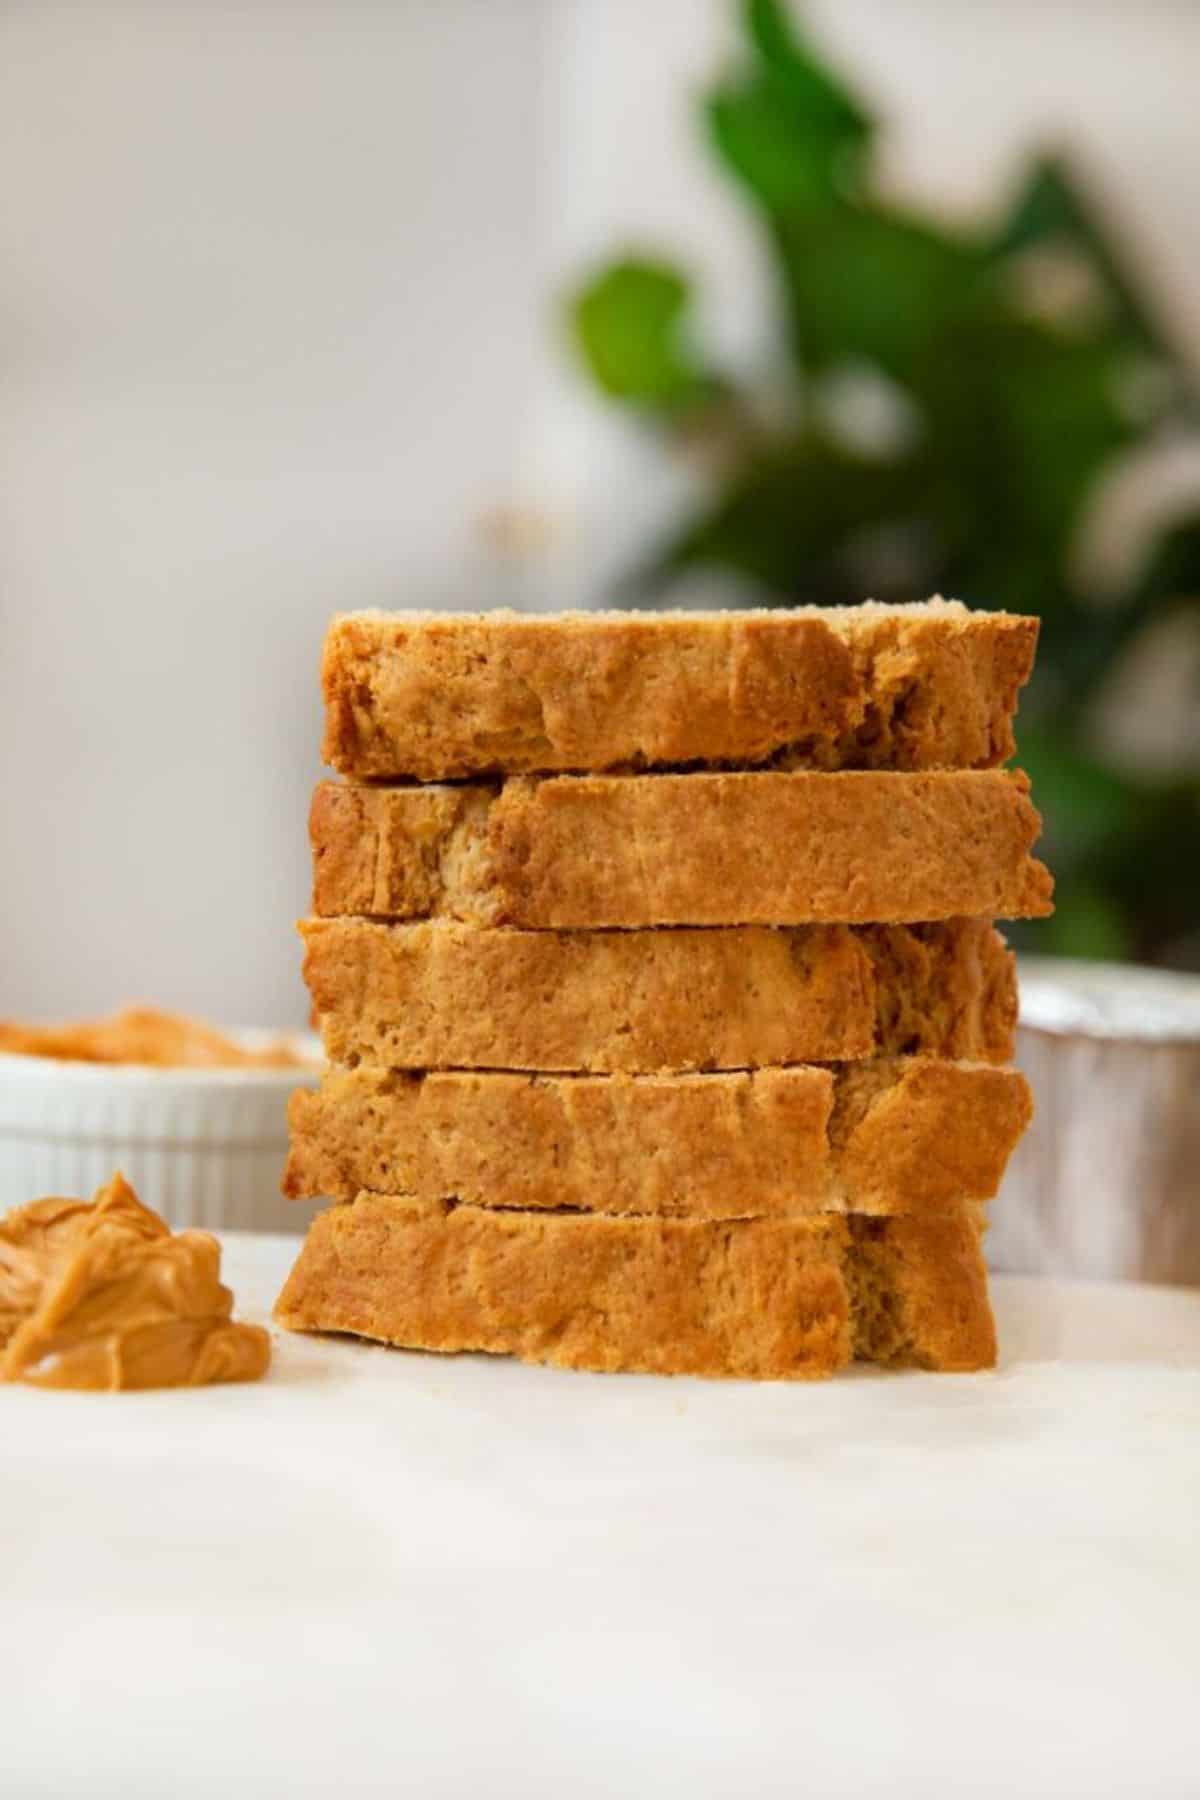 A pile of Peanut Butter Bread slices.